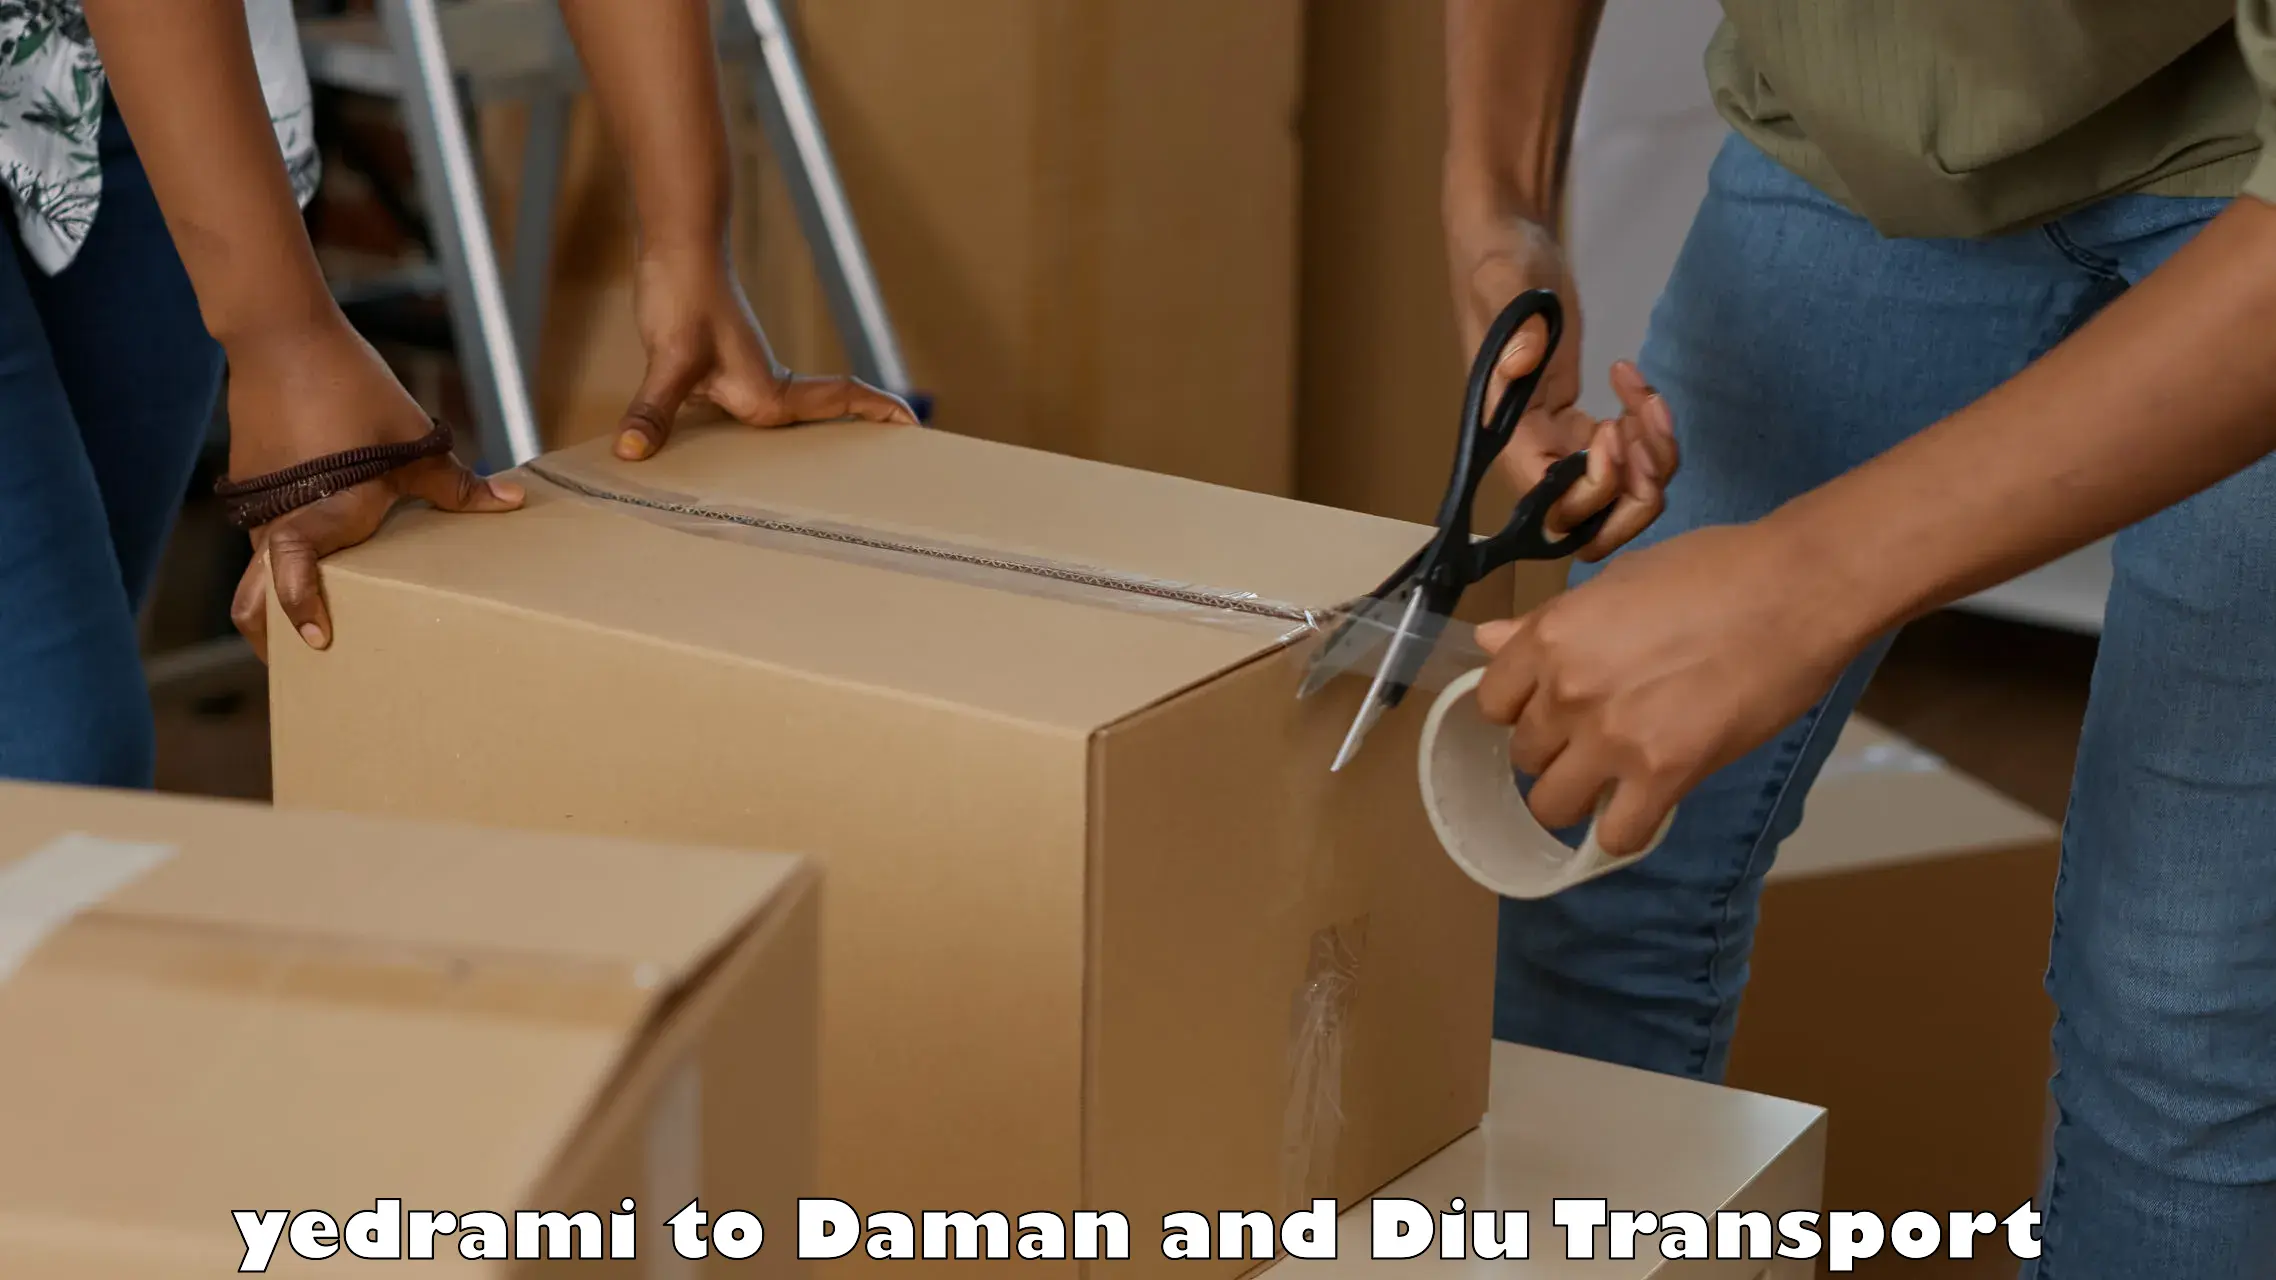 Container transport service yedrami to Daman